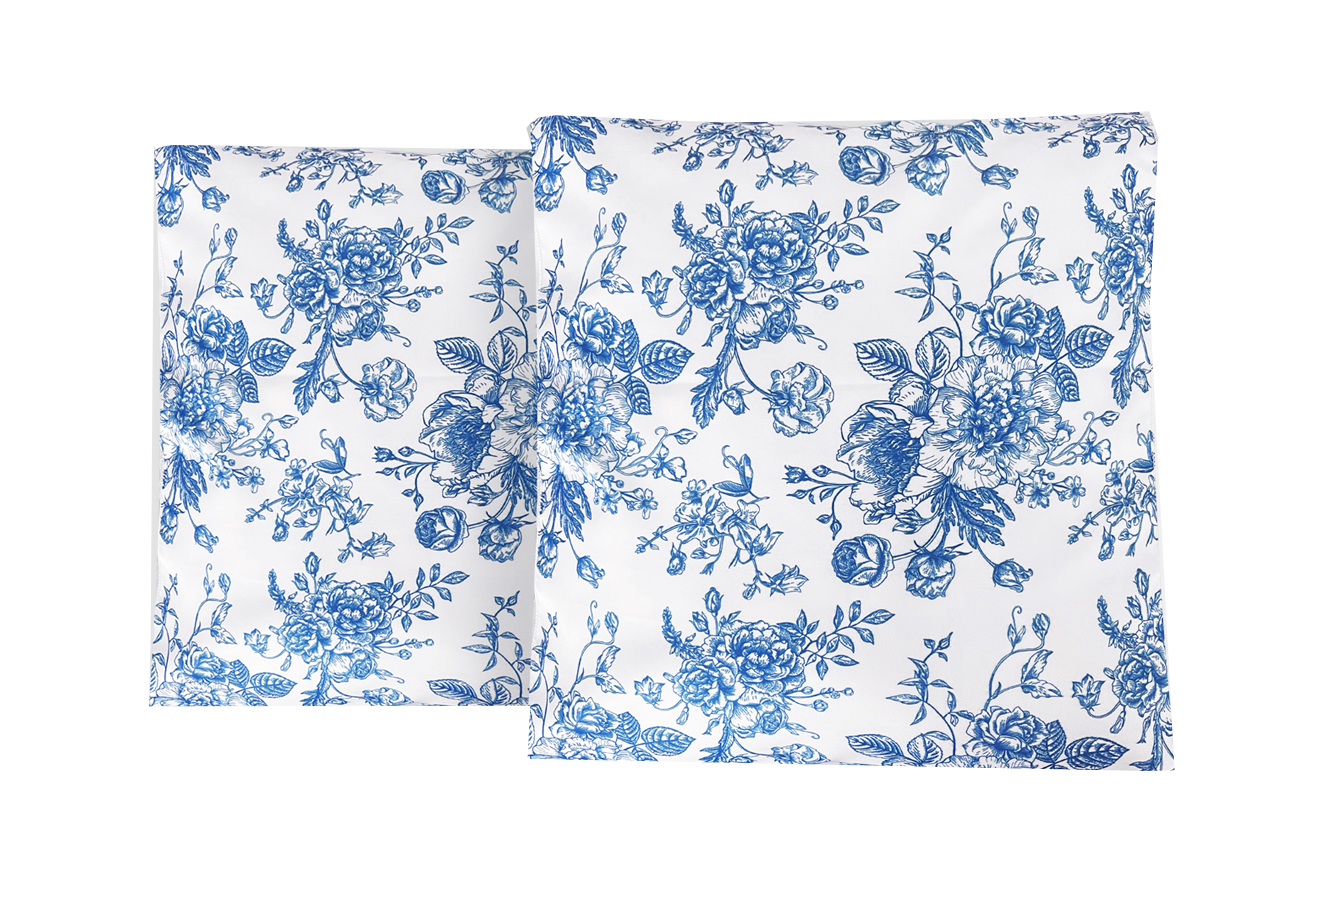 Blue French Floral Toile inspired throw pillowcase